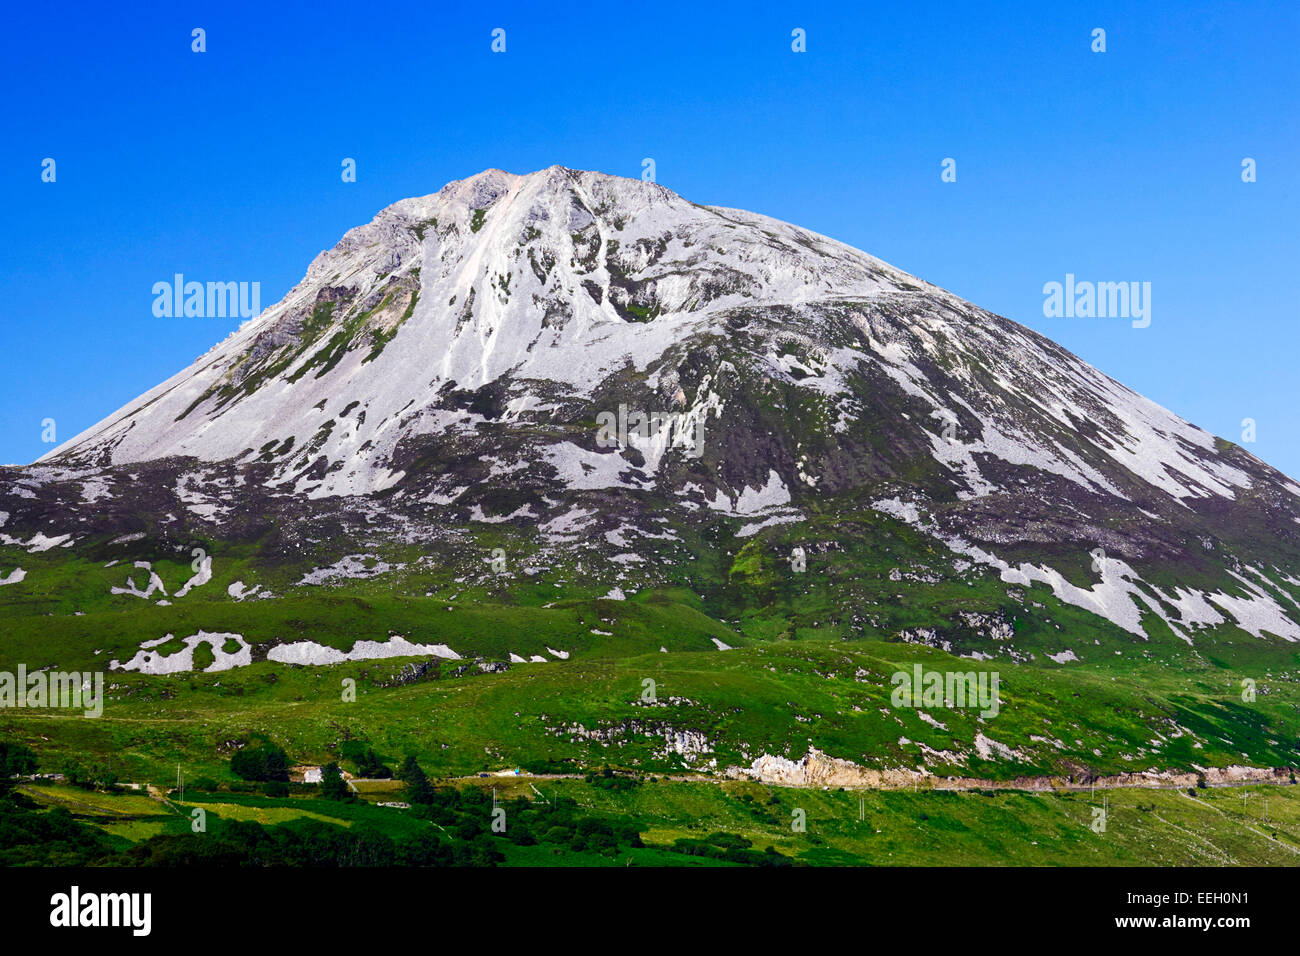 Errigal Mountain in County Donegal Ireland Stockfoto